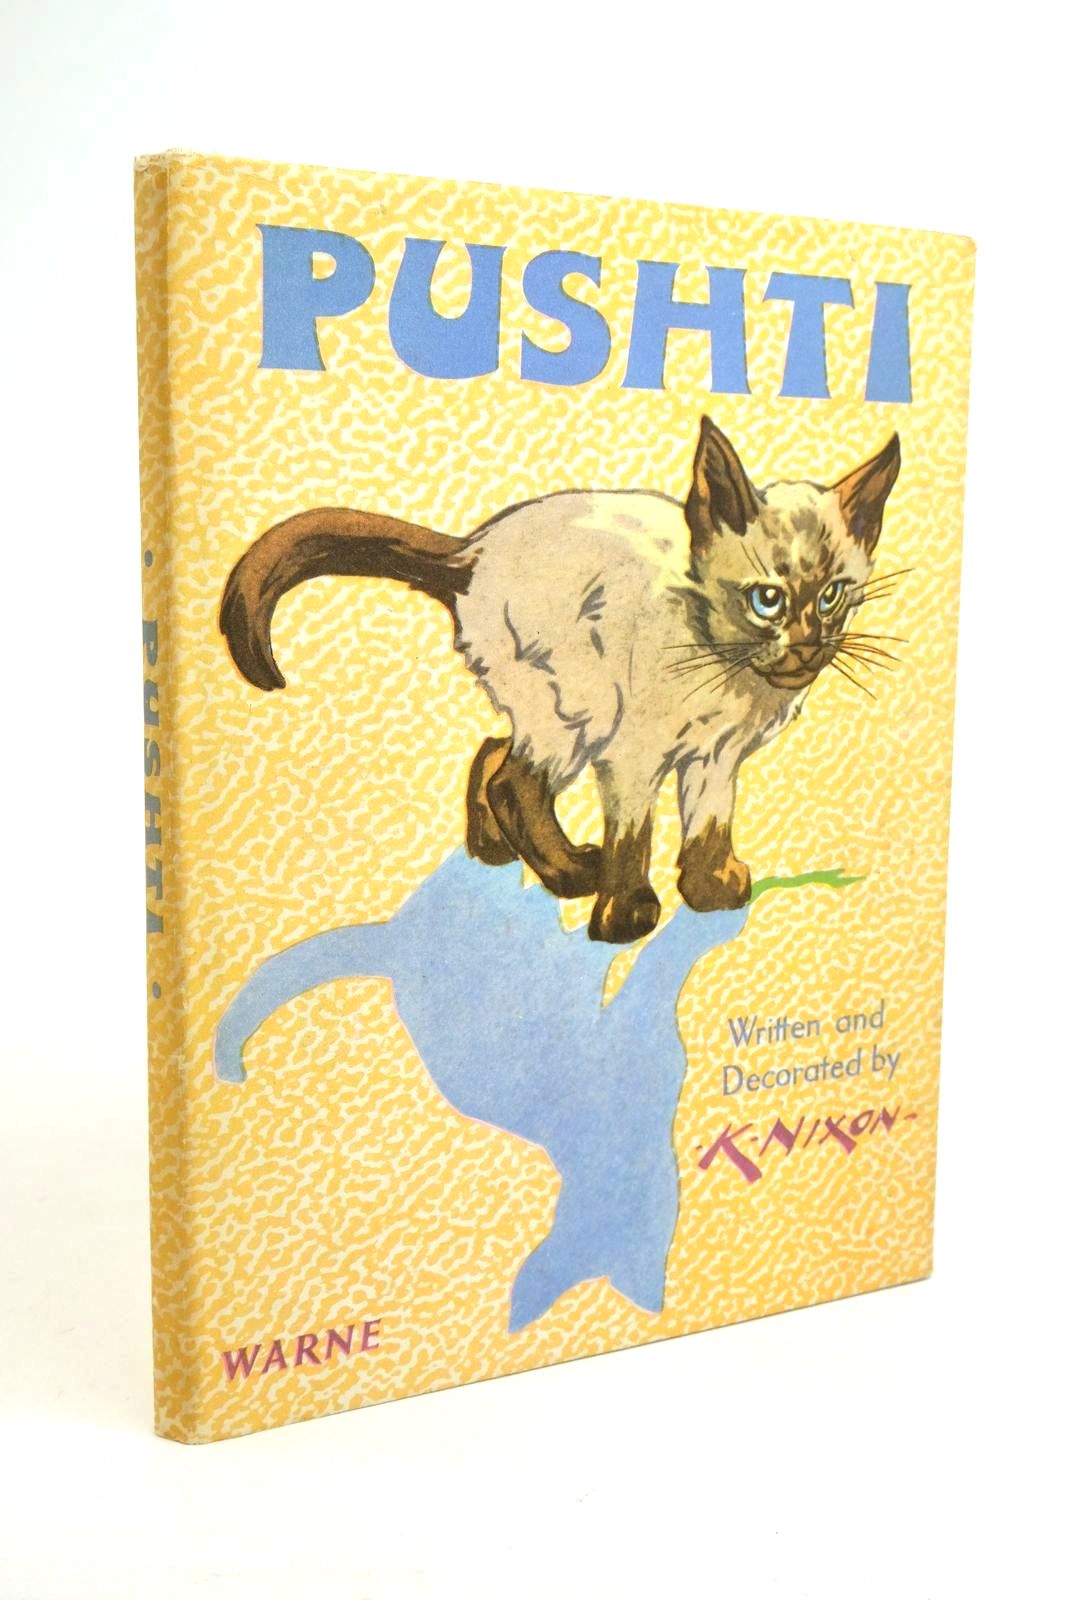 Photo of PUSHTI written by Nixon, K. illustrated by Nixon, K. published by Frederick Warne &amp; Co Ltd. (STOCK CODE: 1322204)  for sale by Stella & Rose's Books